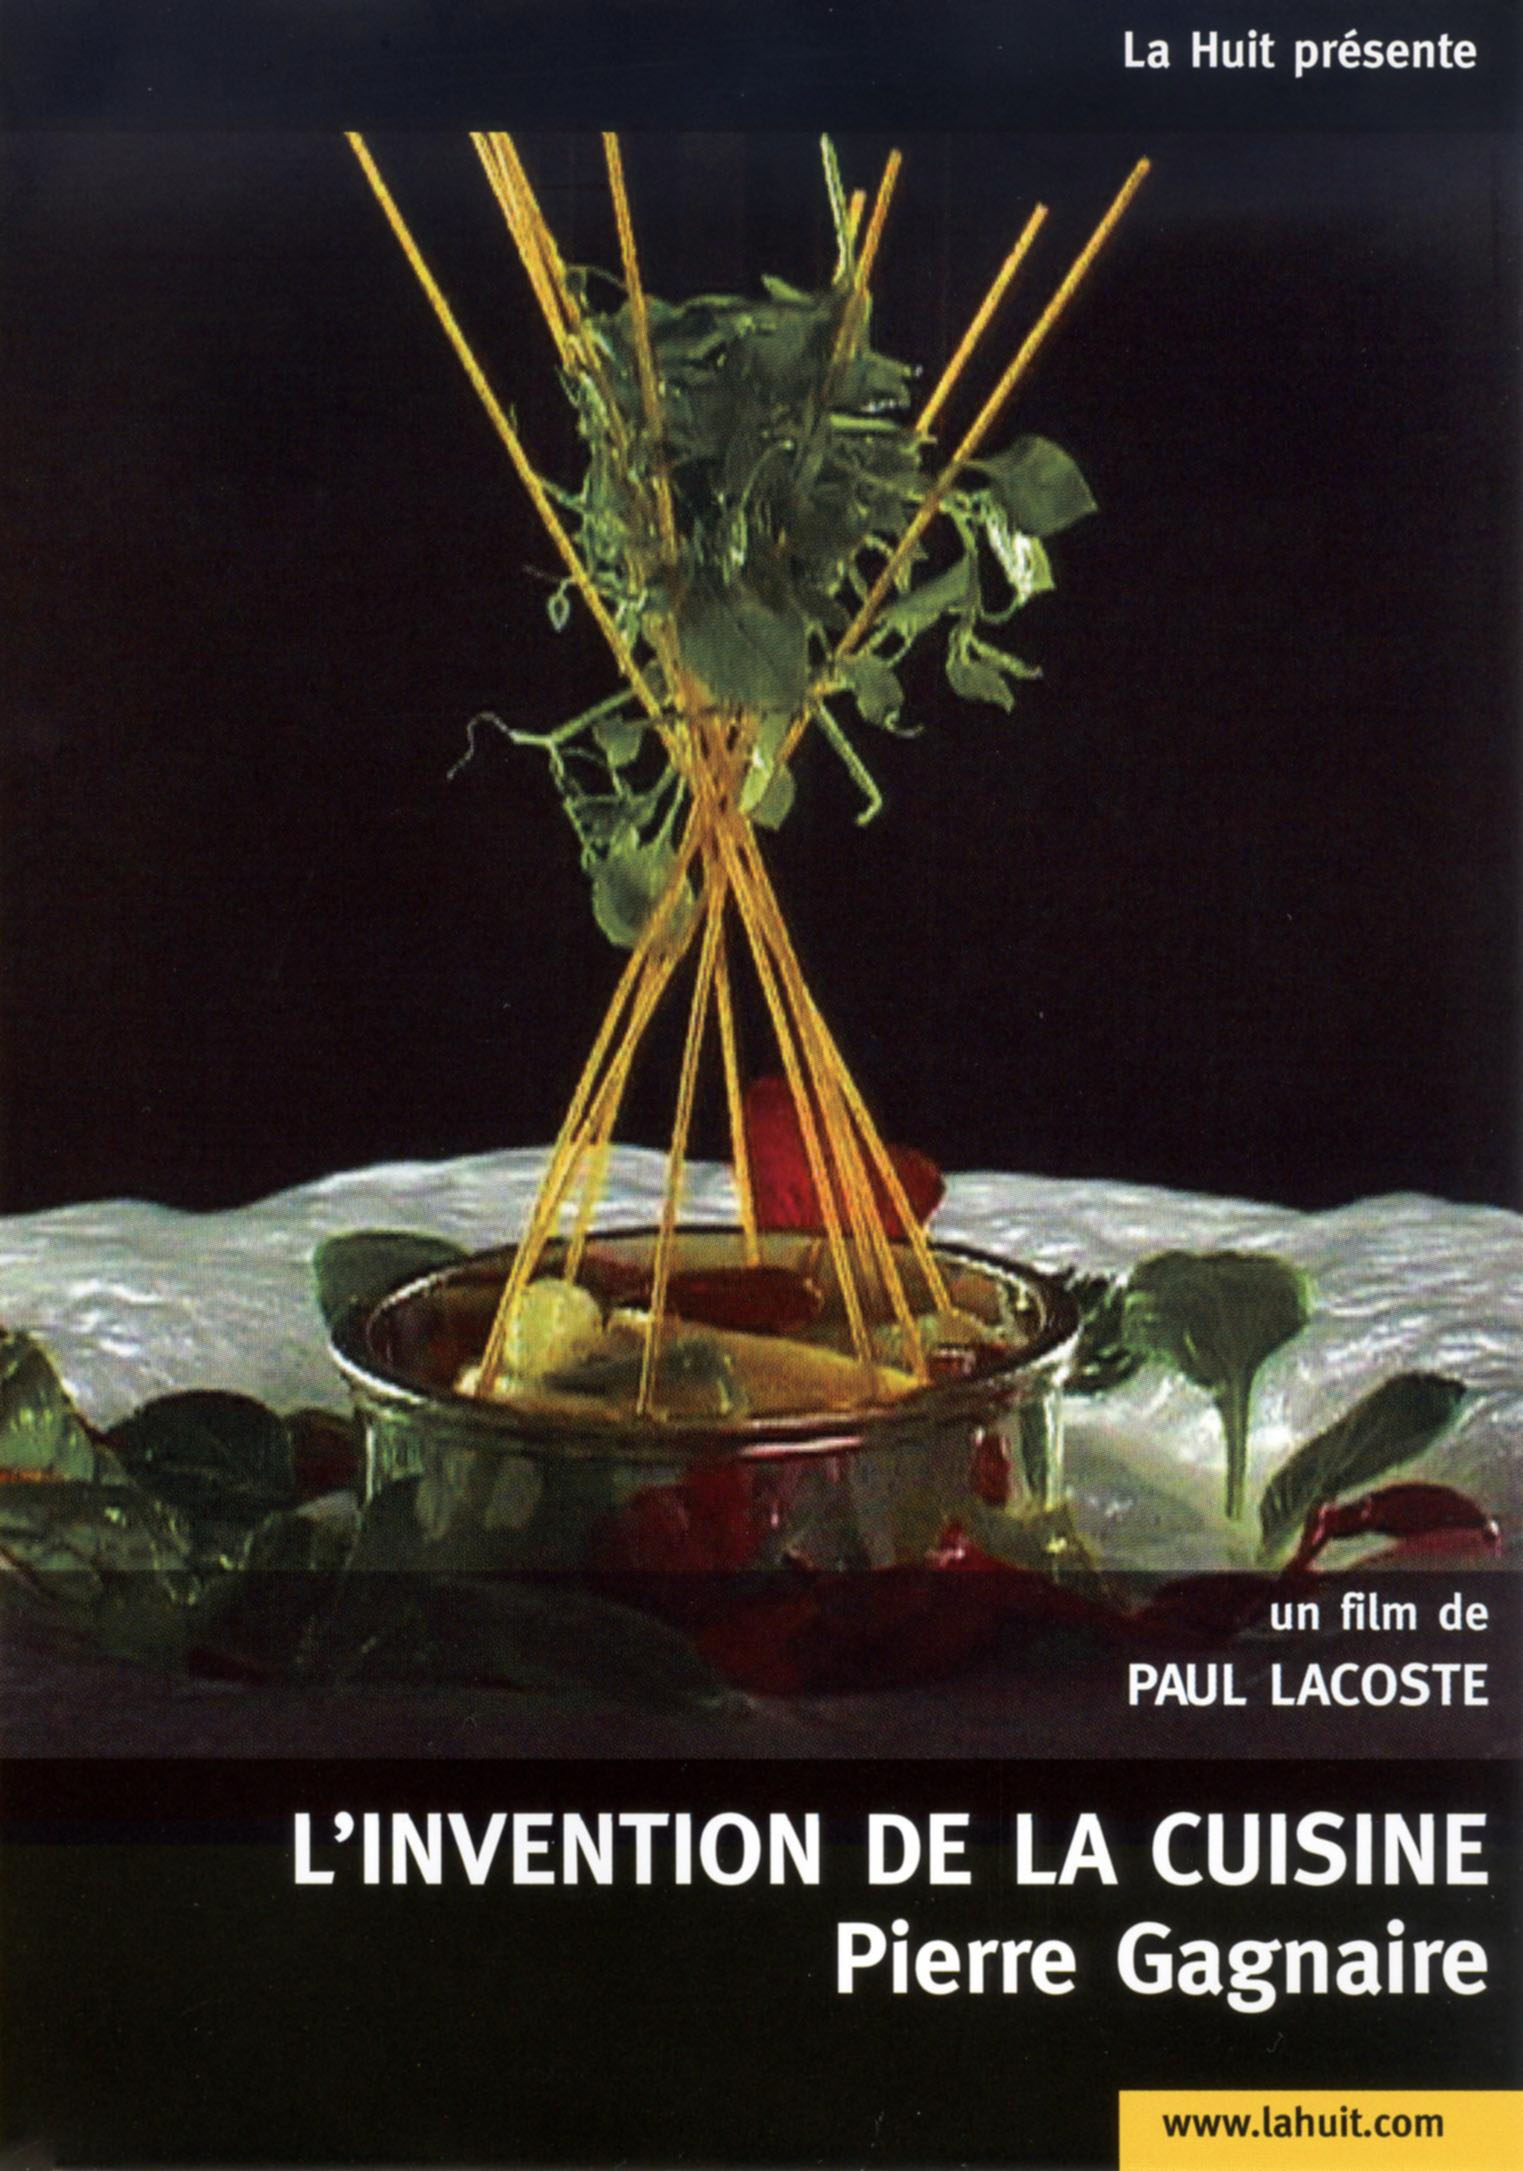 

Inventing Cuisine: Paul Ganaire [DVD] [Eng/Fre/Jap/Spa] [2007]